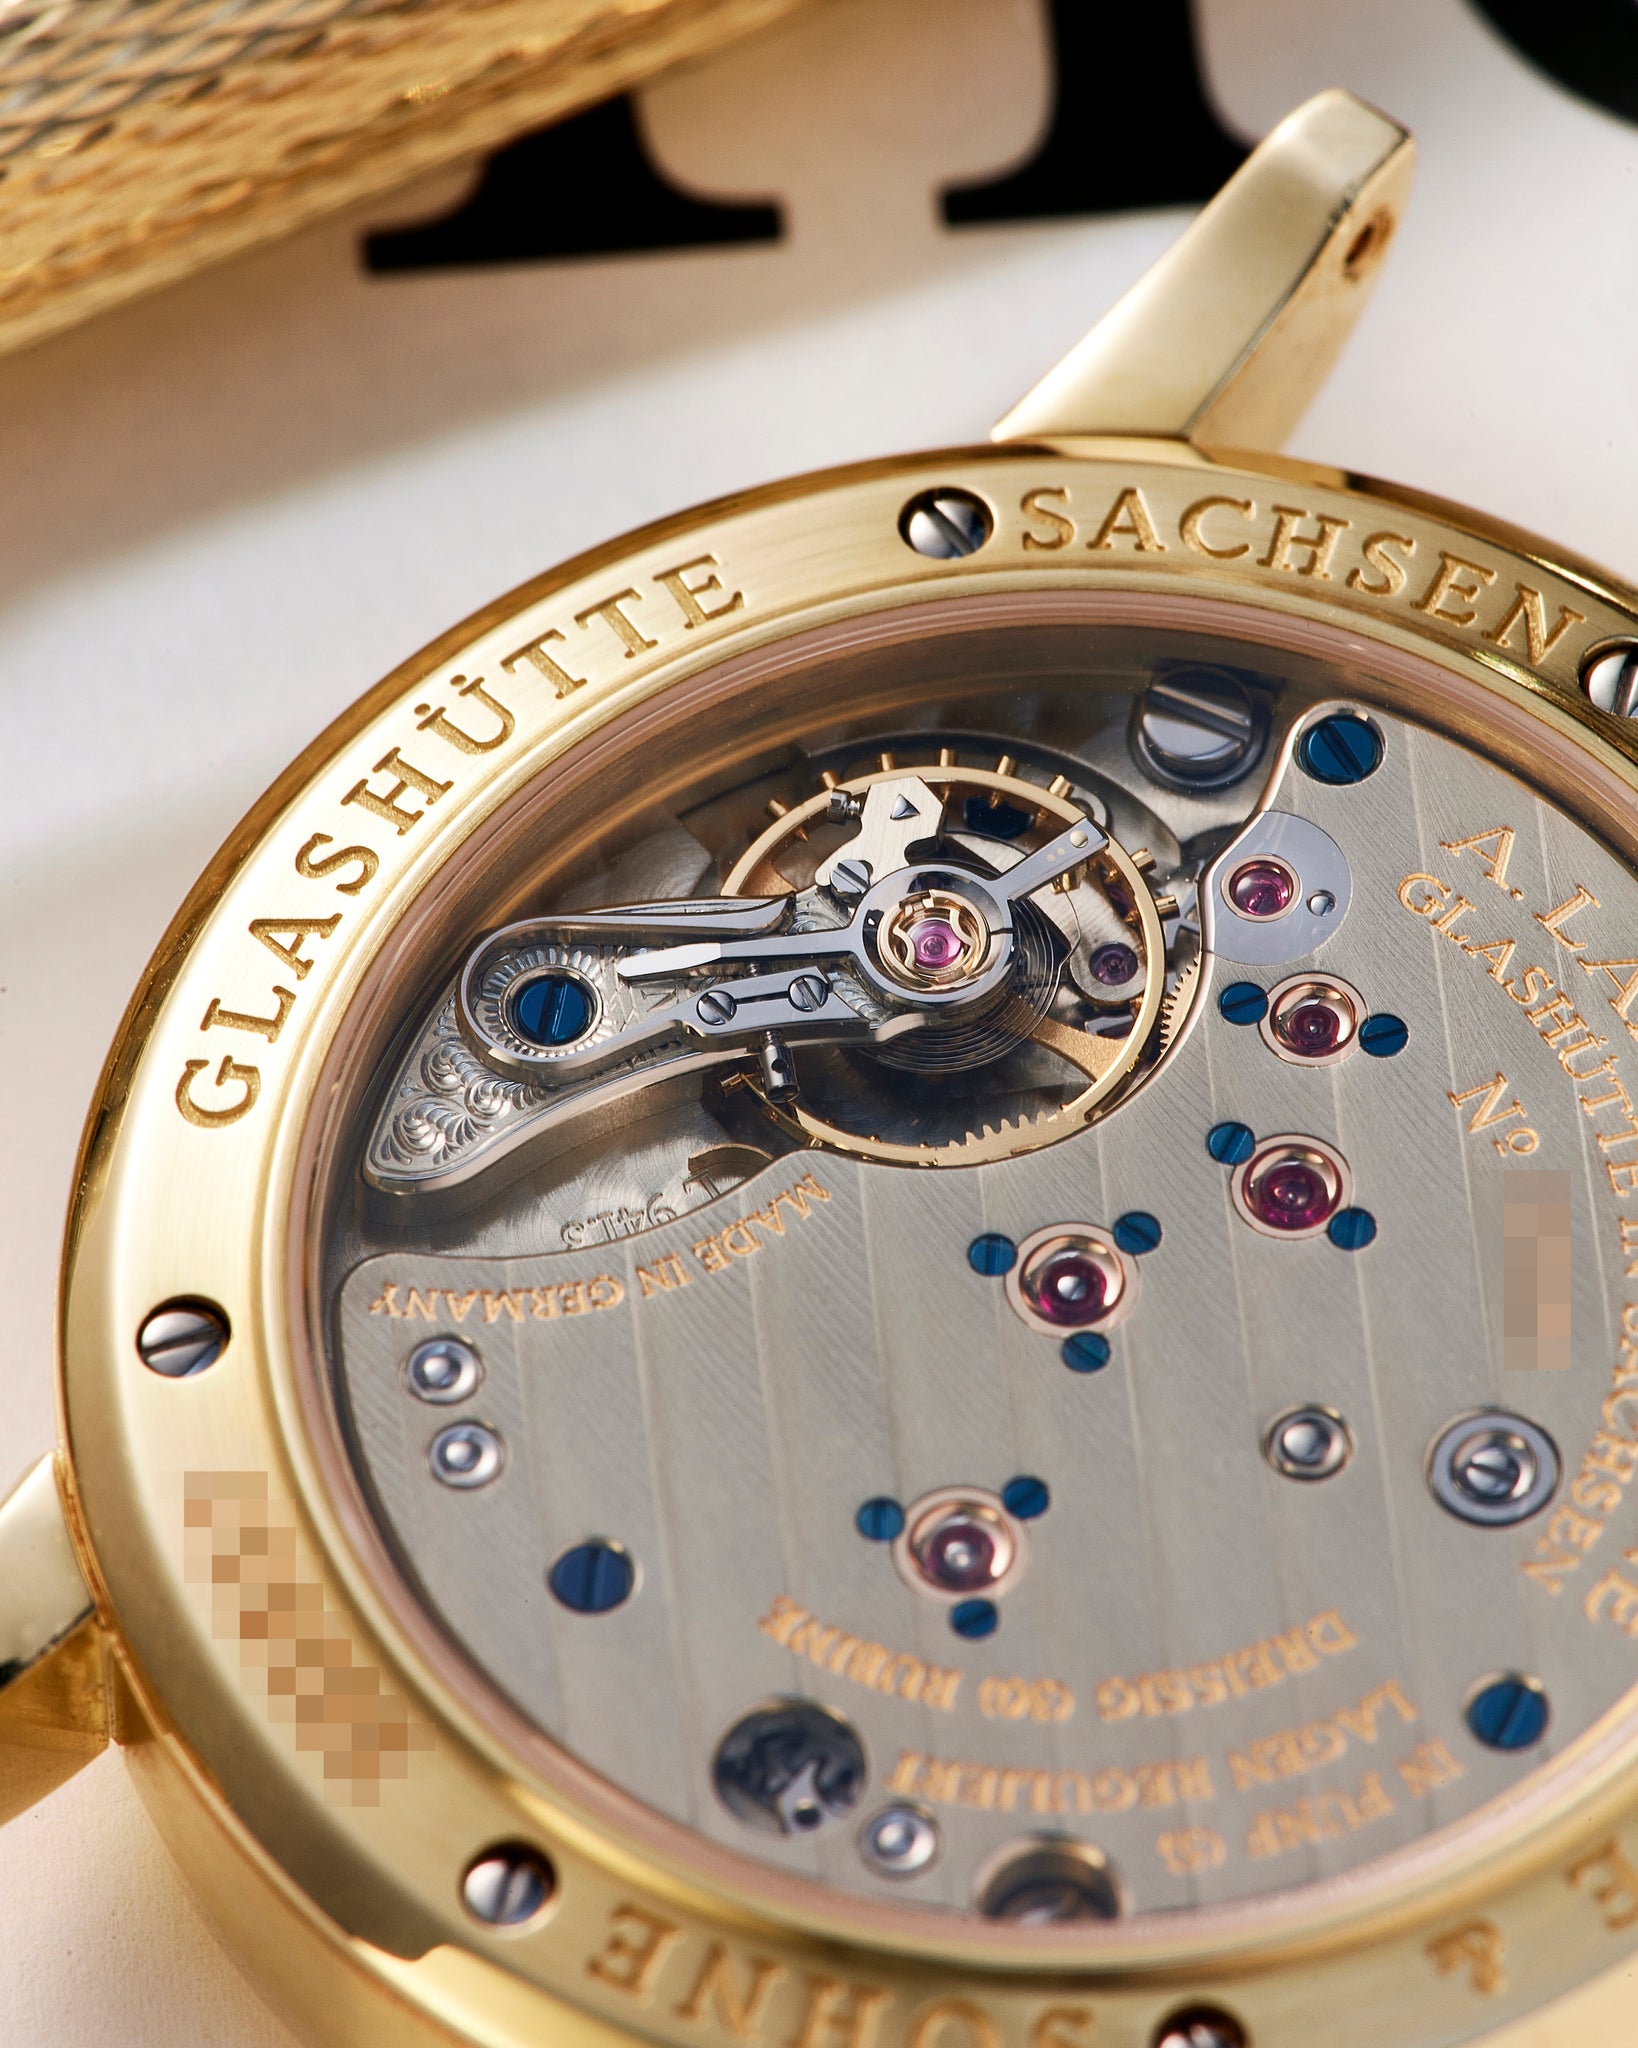 Display back caseback | A. Lange & Söhne | Saxonia | 105.021 | Yellow Gold | Available worldwide at A Collected Man